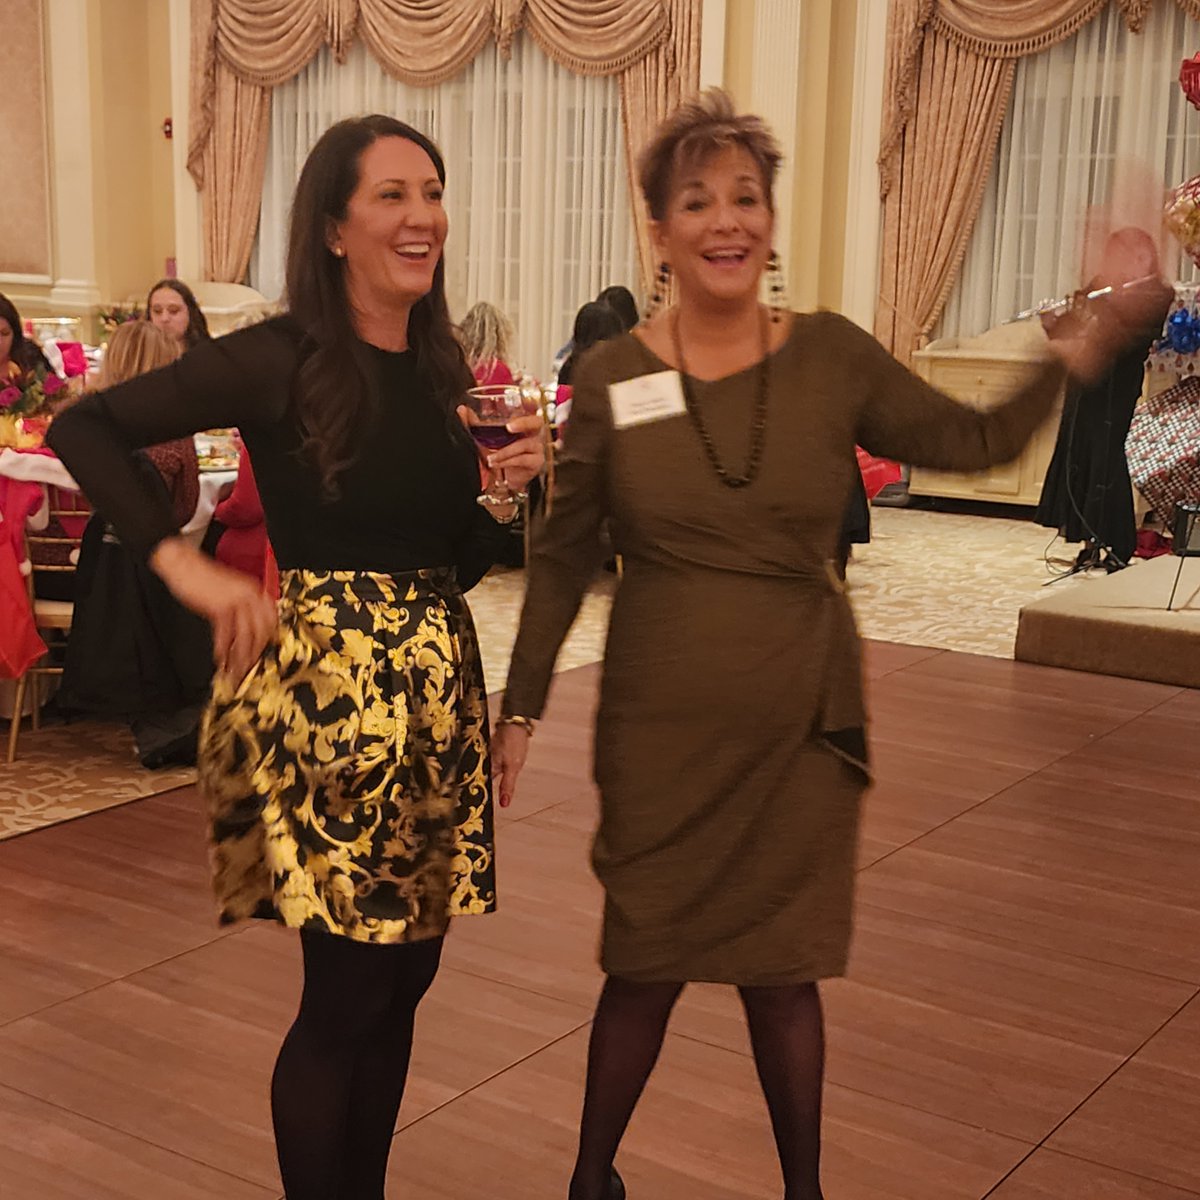 December 5, 2023, OMA attended the Women Construction Owners & Executives Holiday Party, New Board Installation & Honoree Awards. The event was held at The Muttontown Club in East Norwich. It's always a pleasure to encourage & support women, especially those in leadership.